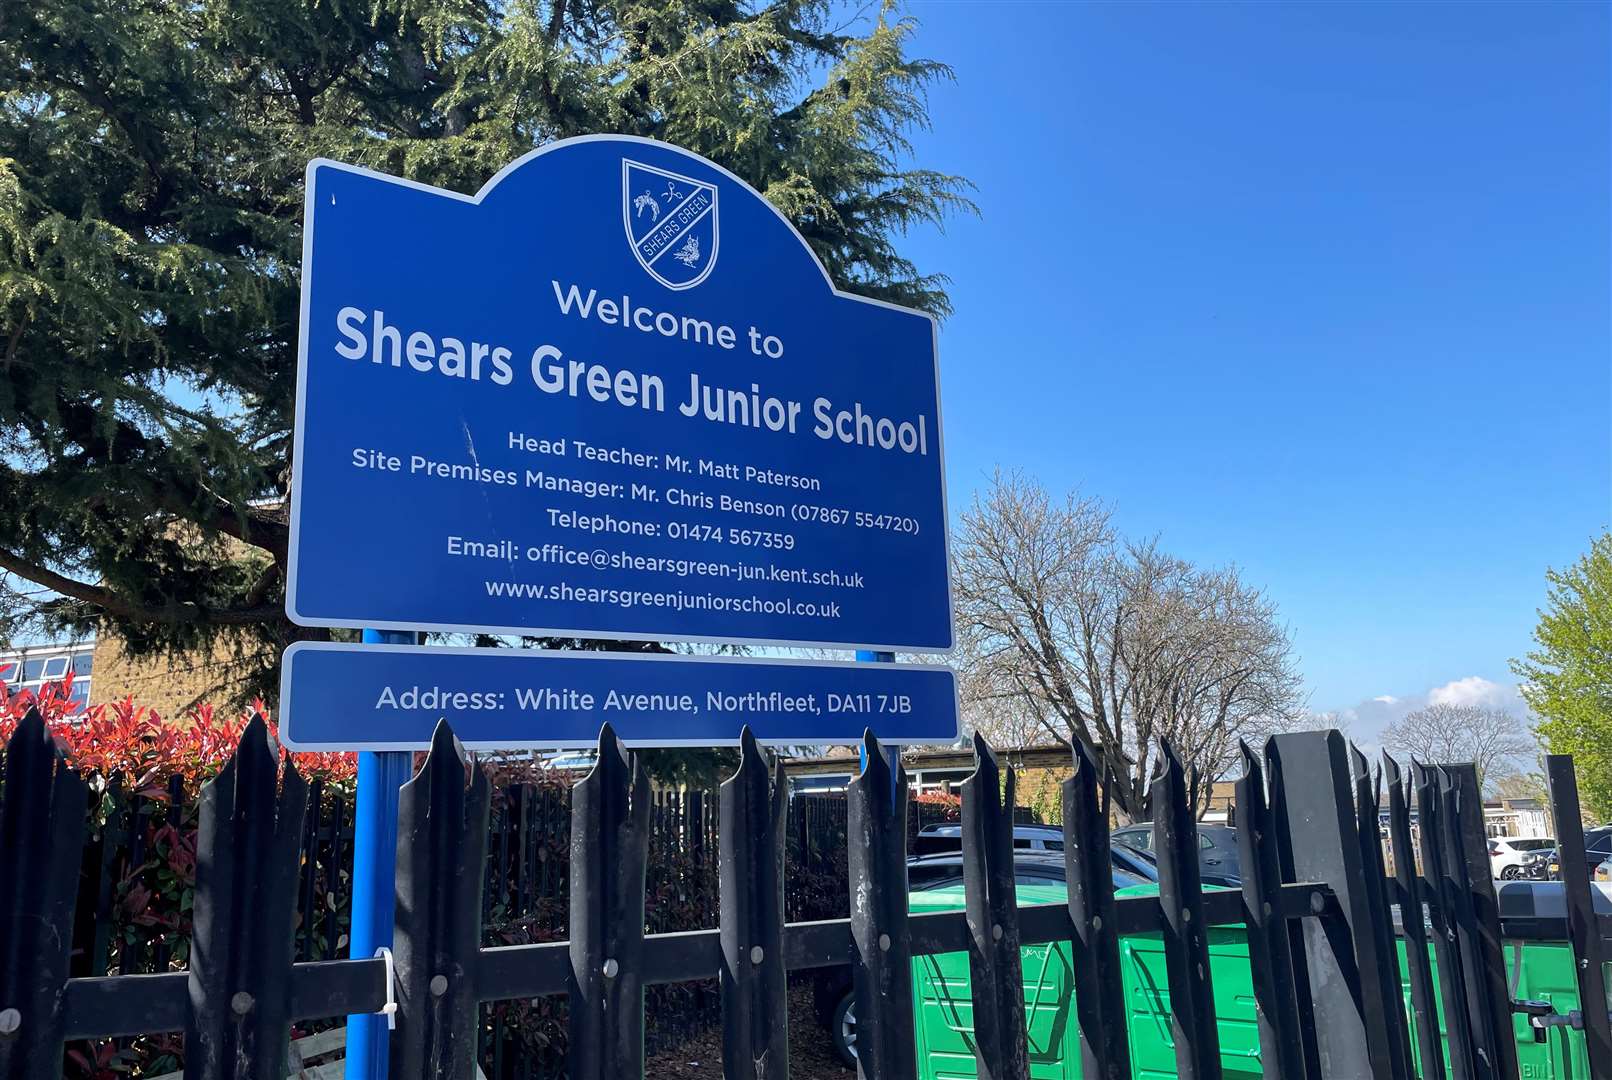 Teachers at Shears Green Junior School have noticed changes in children’s behaviour and learning